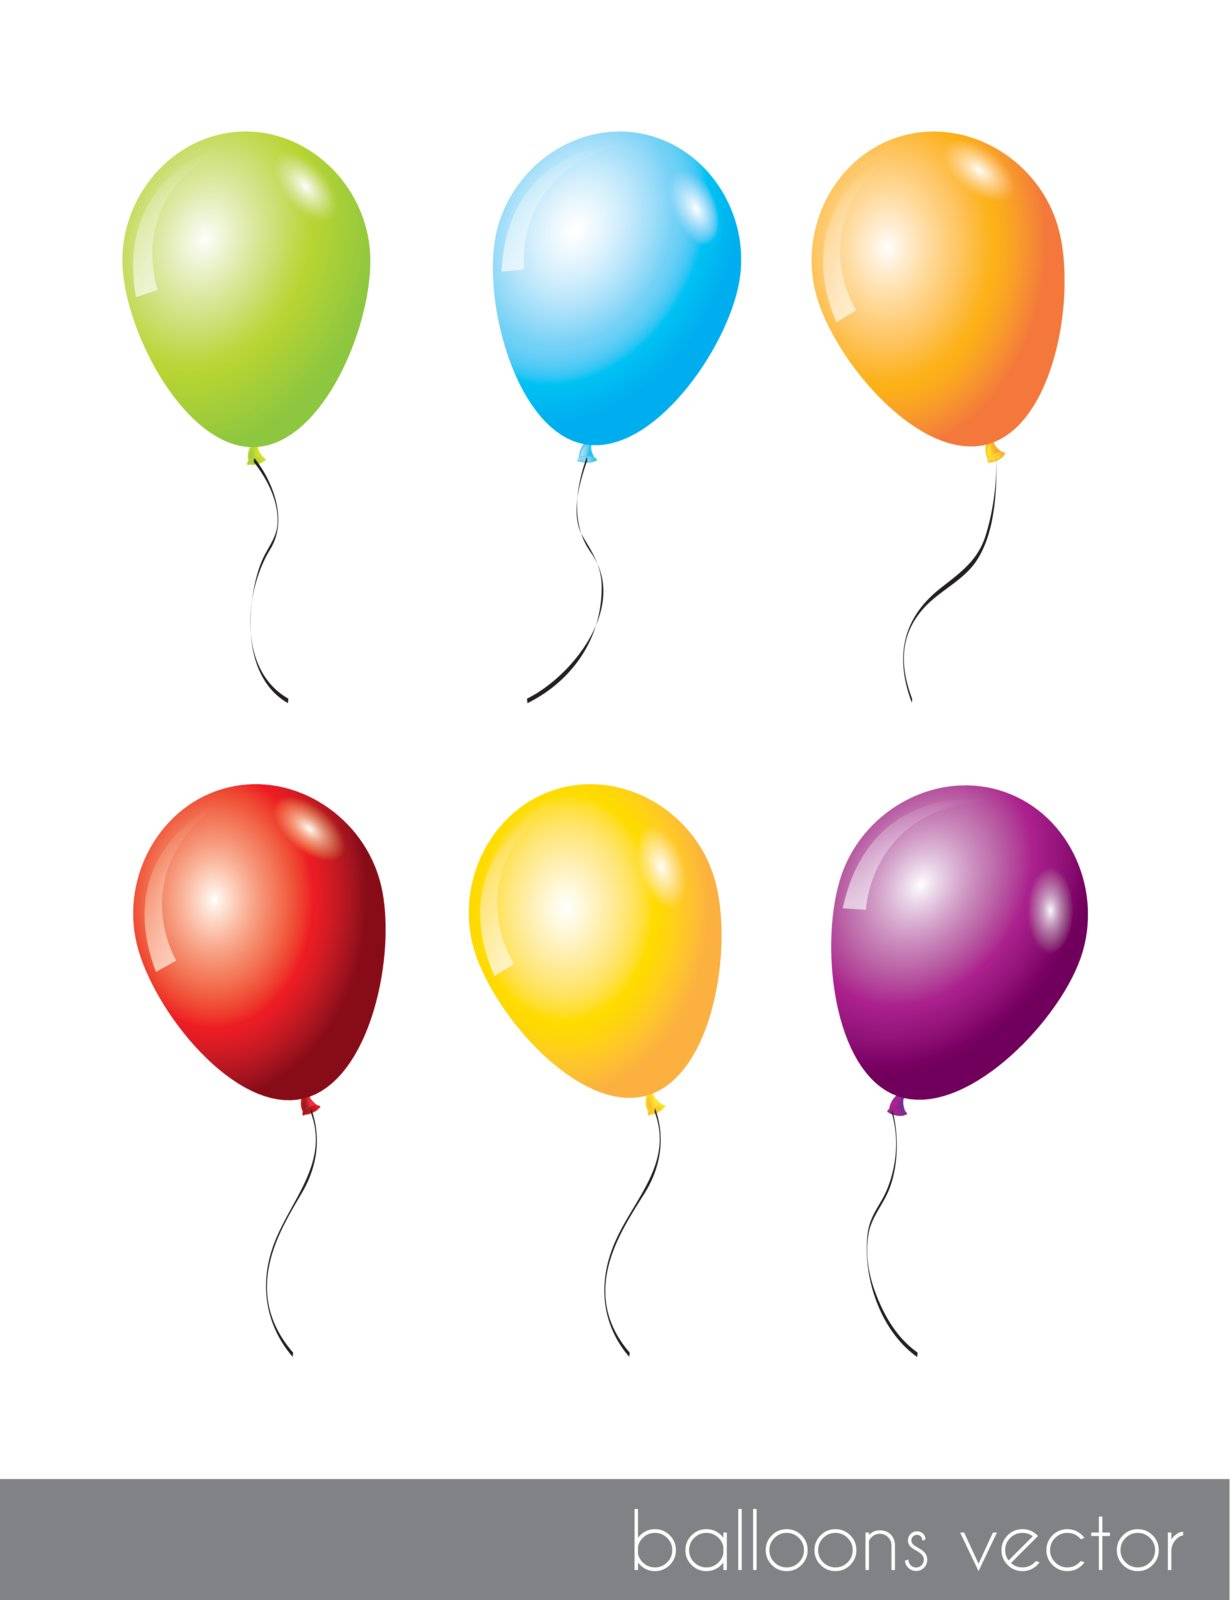 six colorful balloons isolated over white background. vector illustration